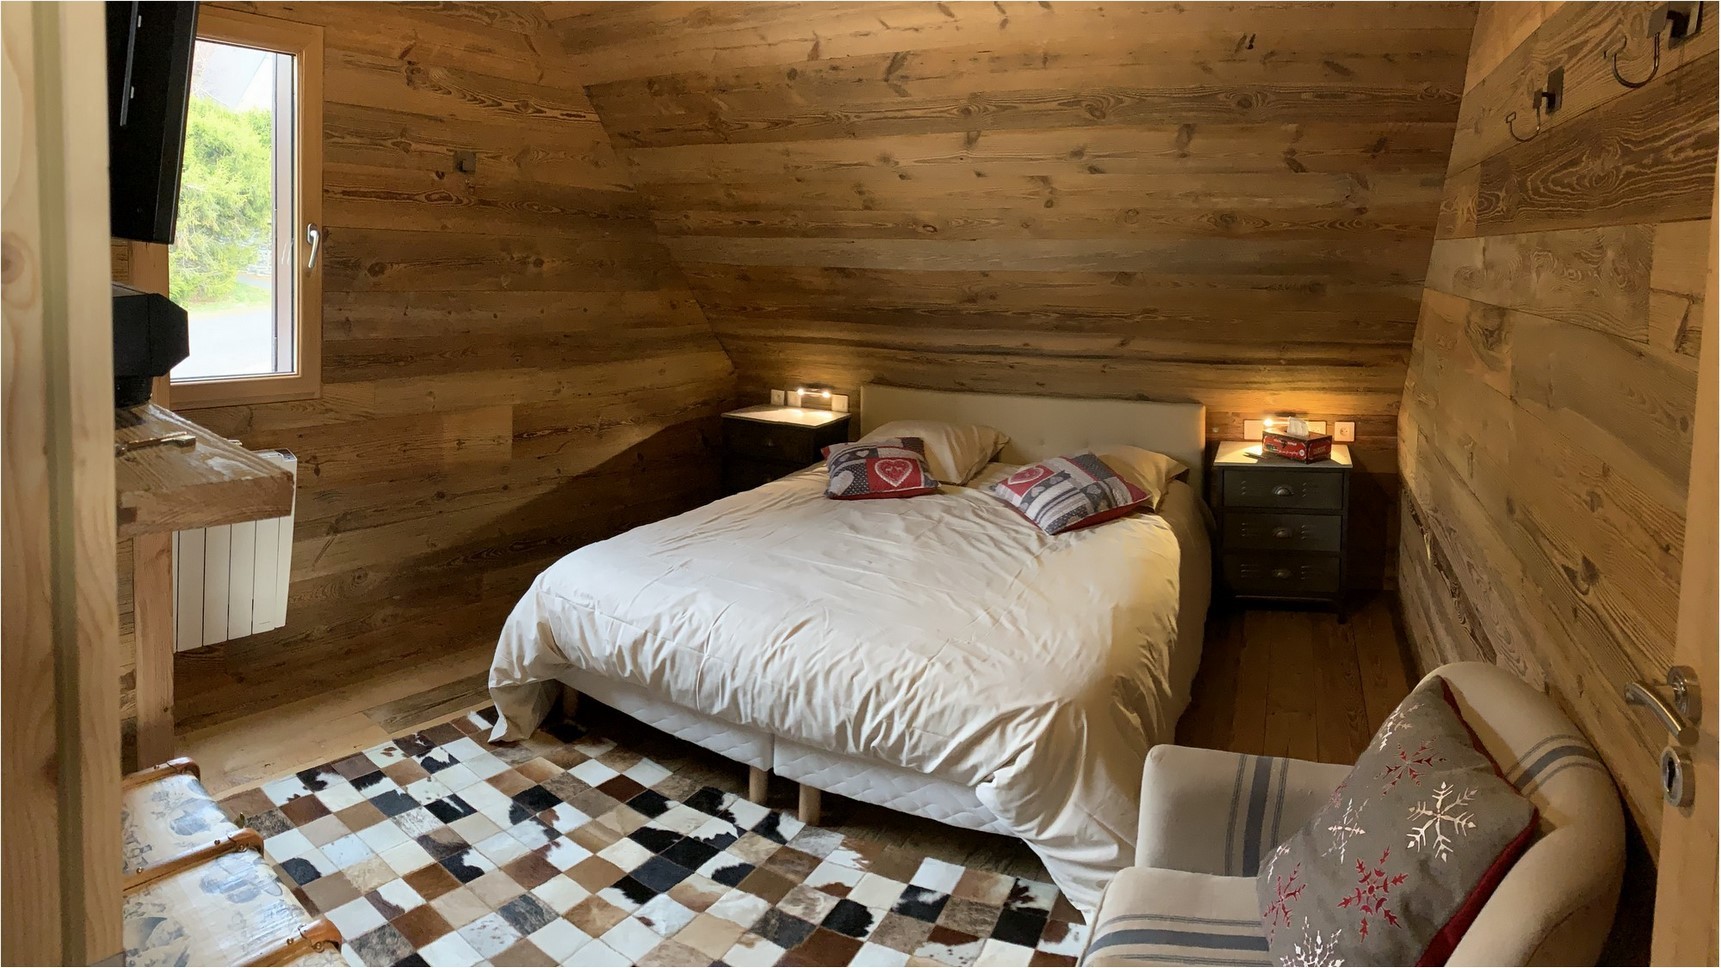 Chalet l'Anorak, Tyrolean bedroom, King Size bed and cowhide rug